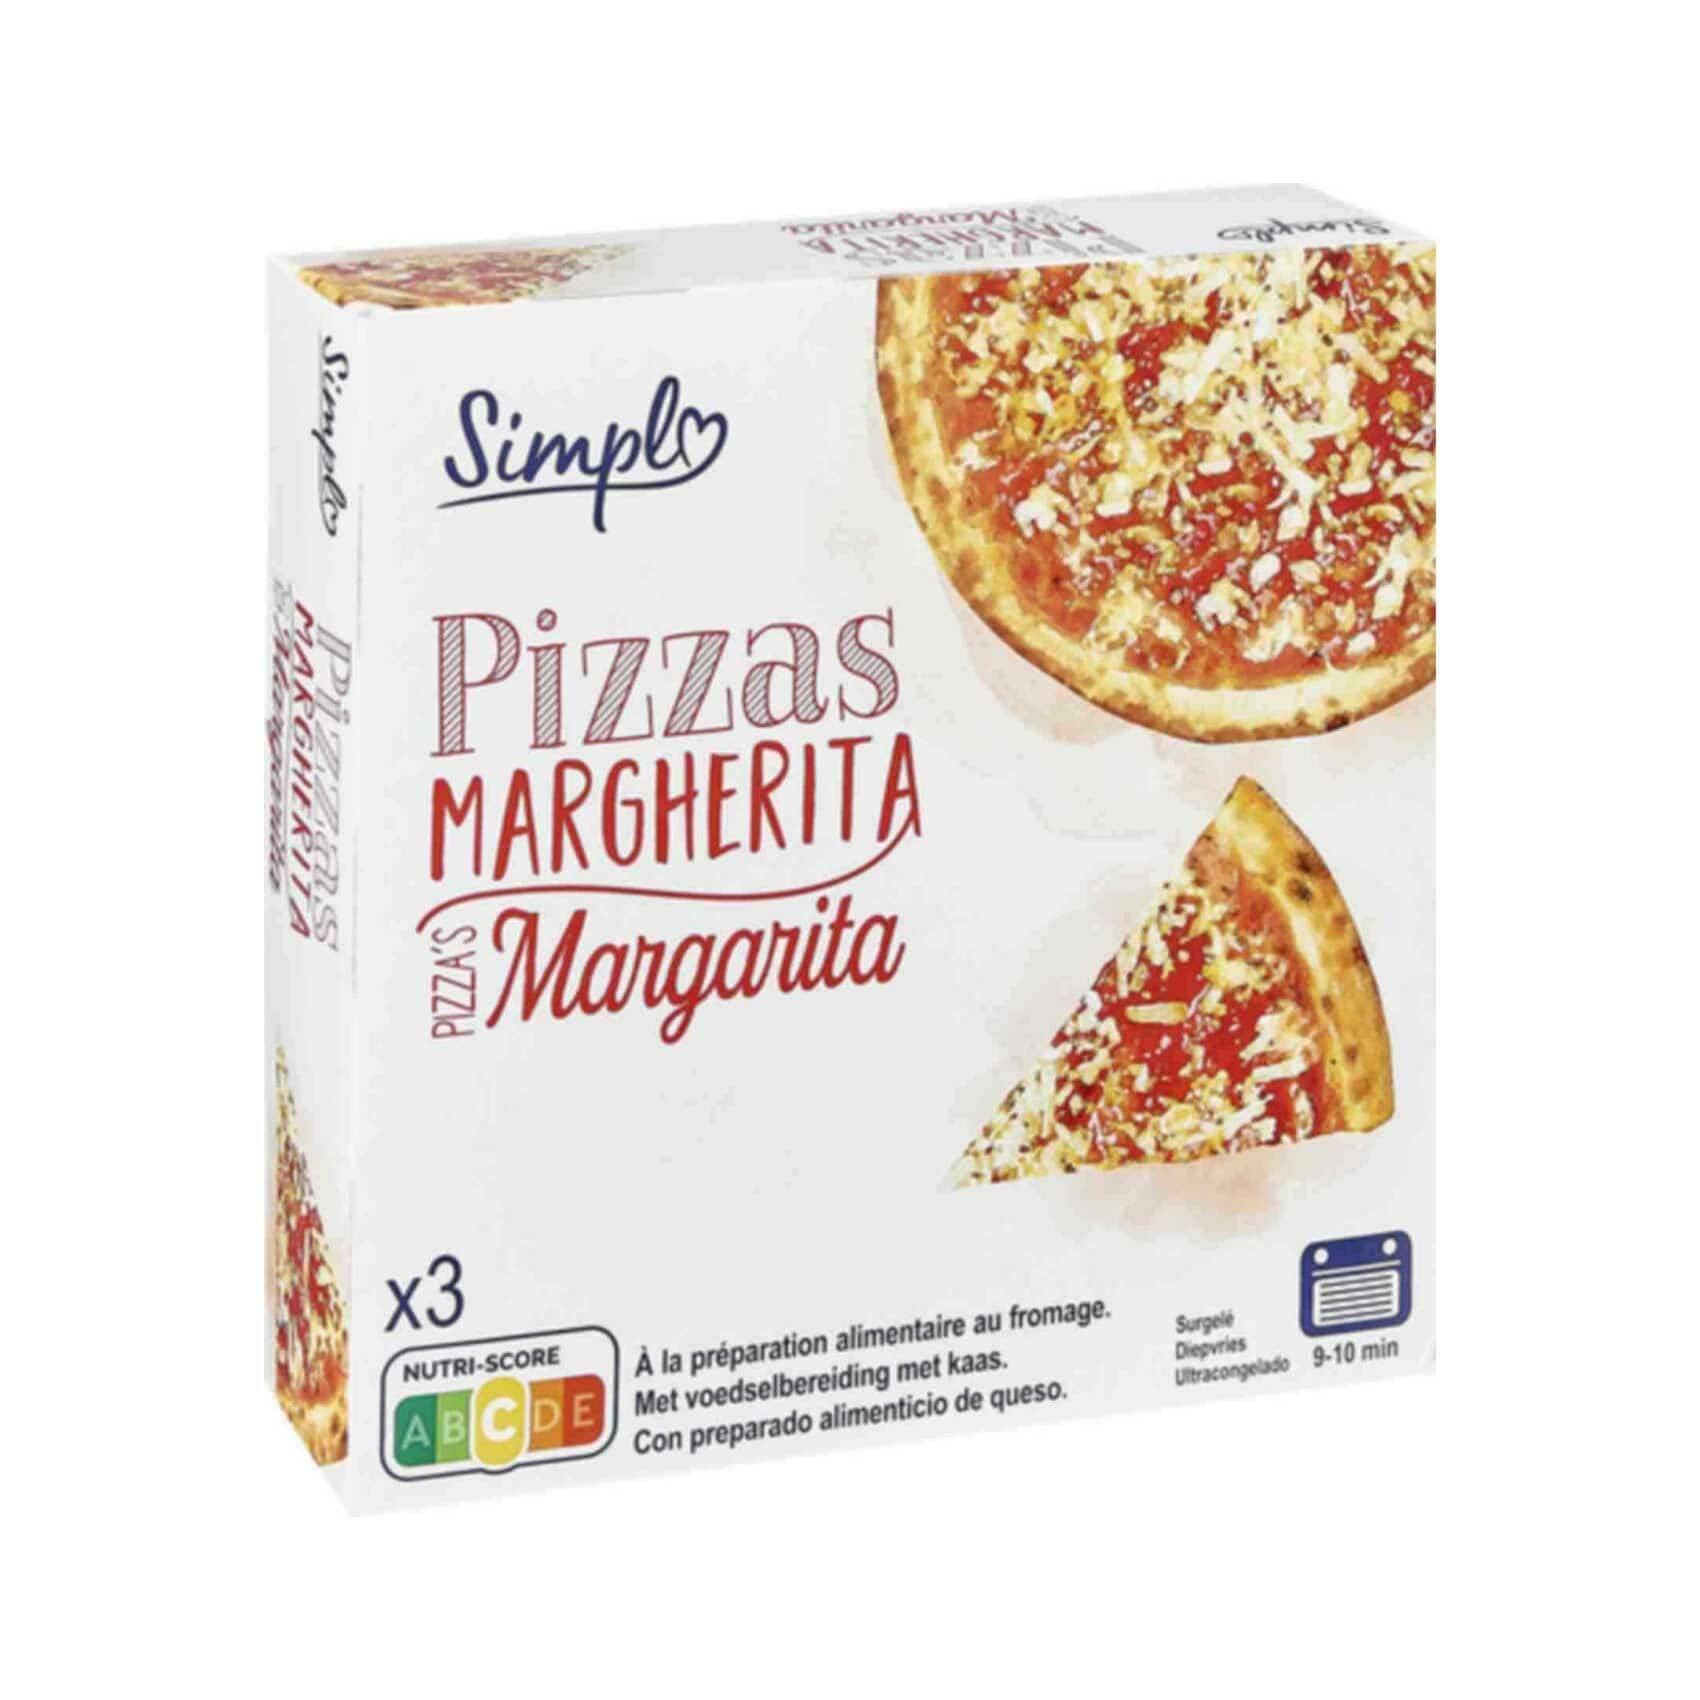 Buy Carrefour Pizza Margherita 900g